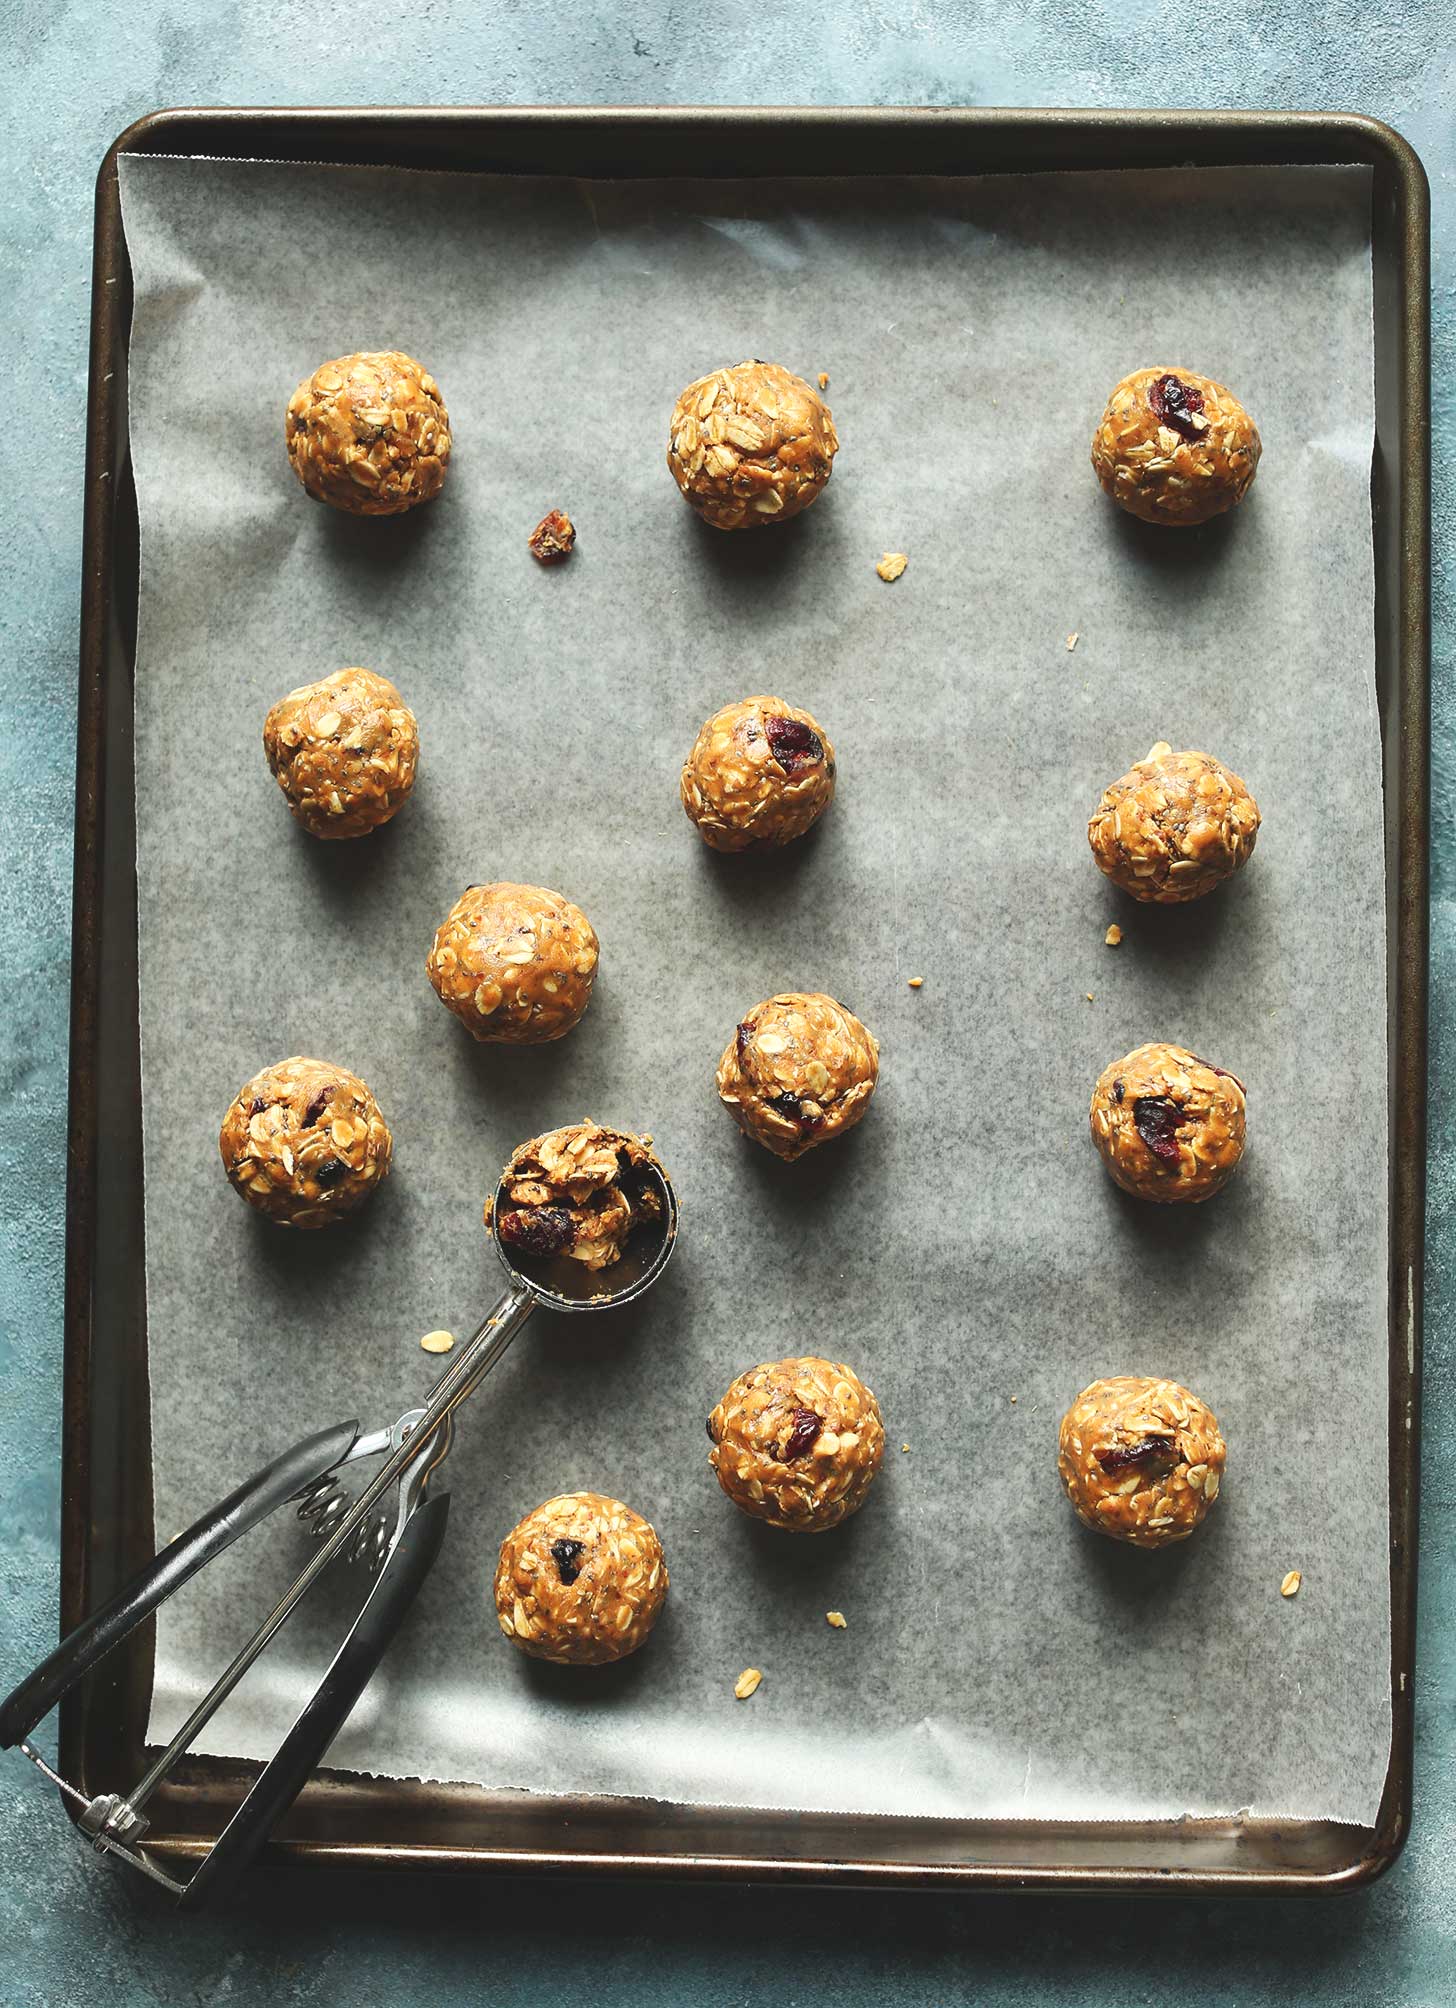 Parchment-lined baking sheet with protein and fiber-rich energy bites